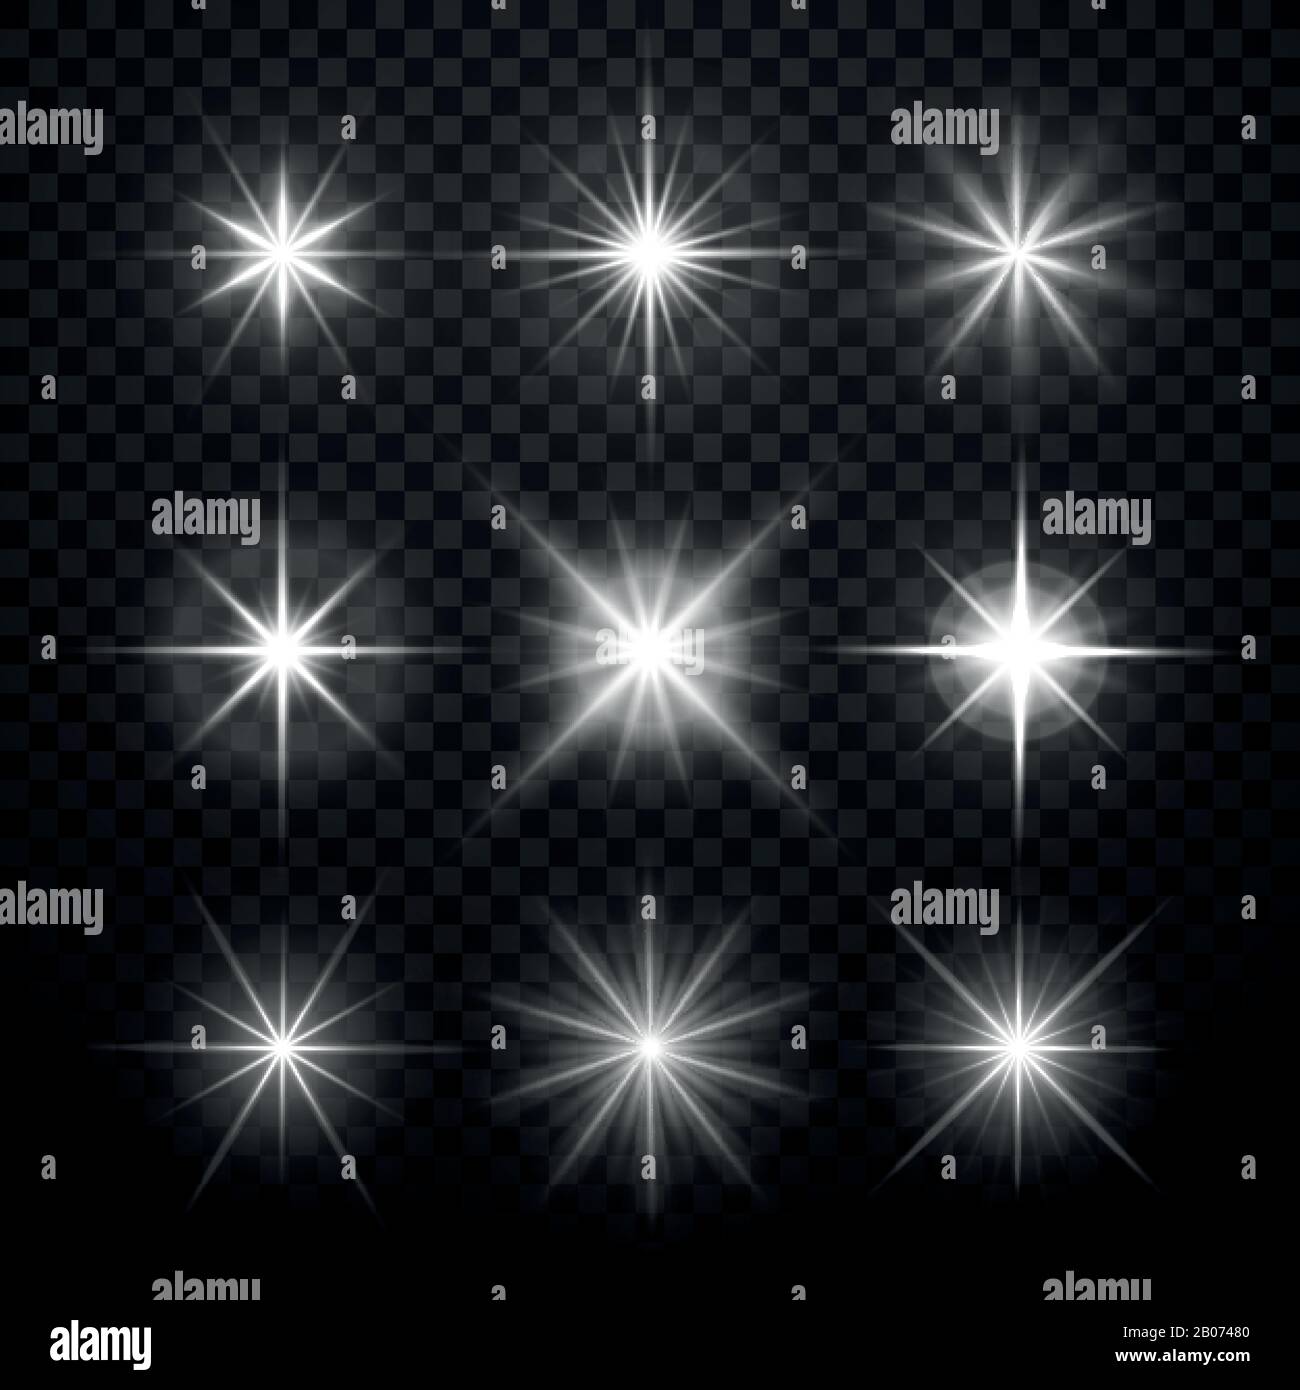 Glowing light effects, stars bursts with sparkles isolated on transparent checkered background. Vector illustration Stock Vector